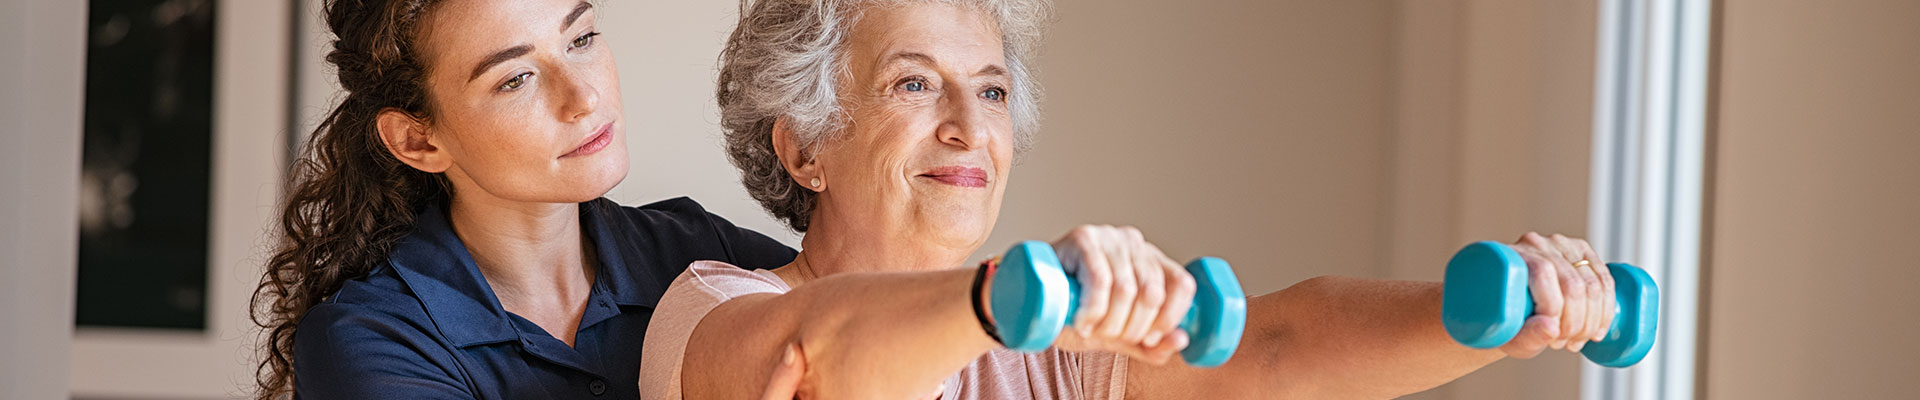 Caregiver assisting with exercises